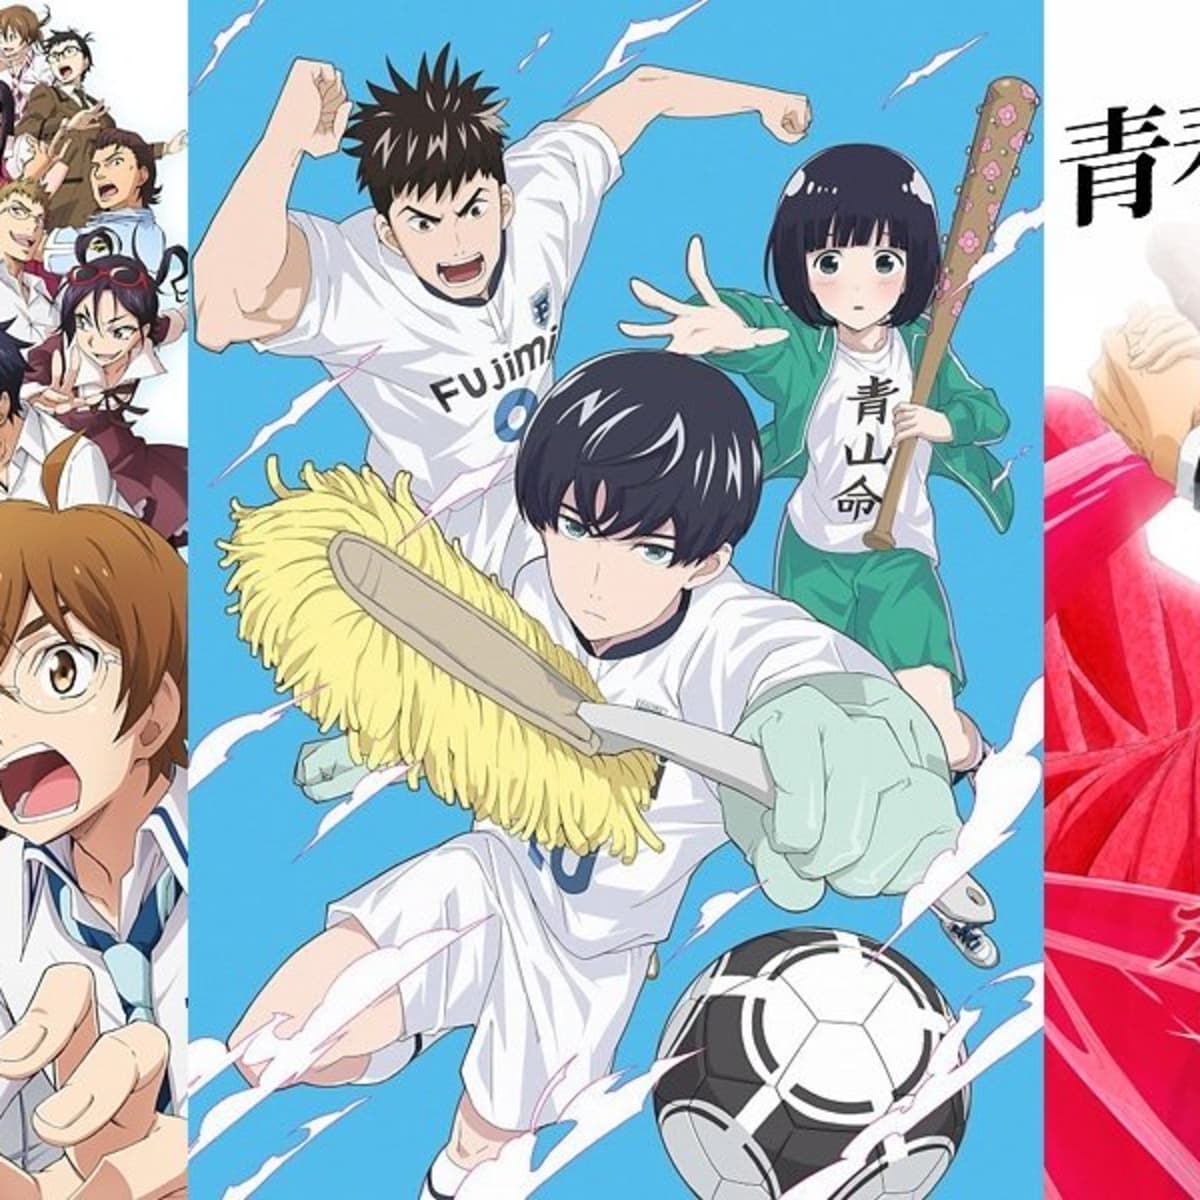 football/soccer Anime - List with the best of the genre